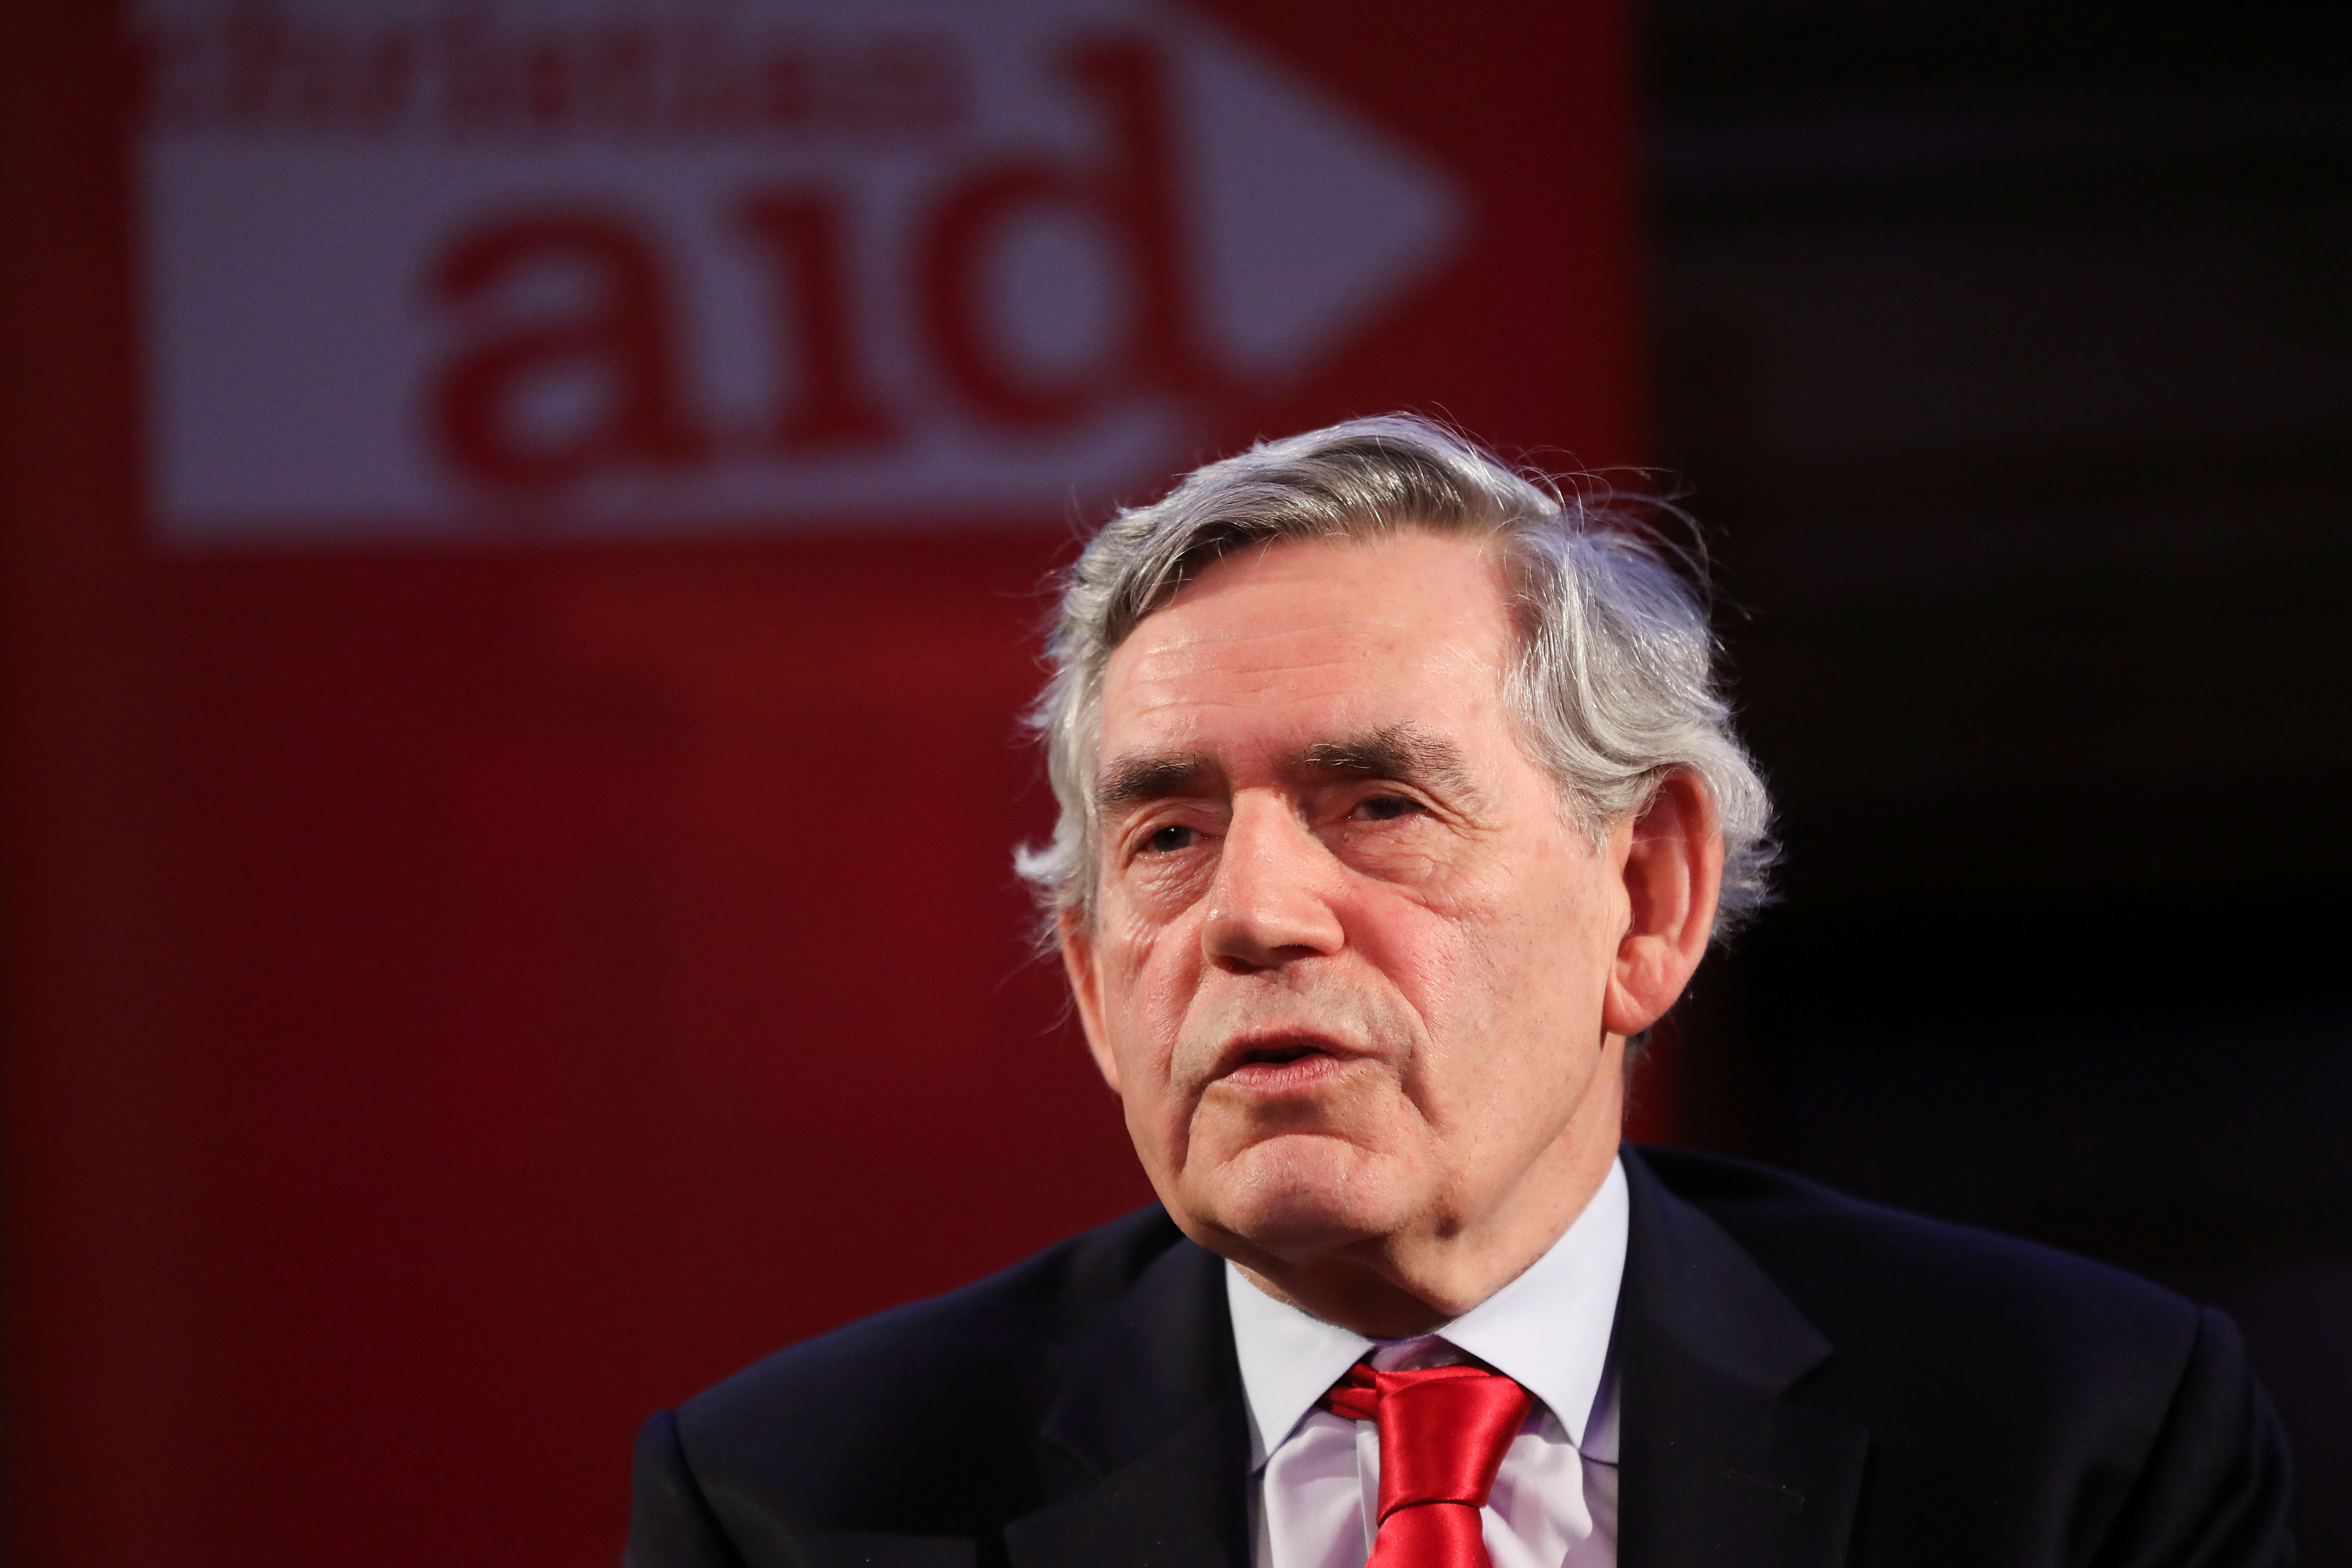 Britain's former Prime Minister Gordon Brown speaks during a Christian Aid Week event in London